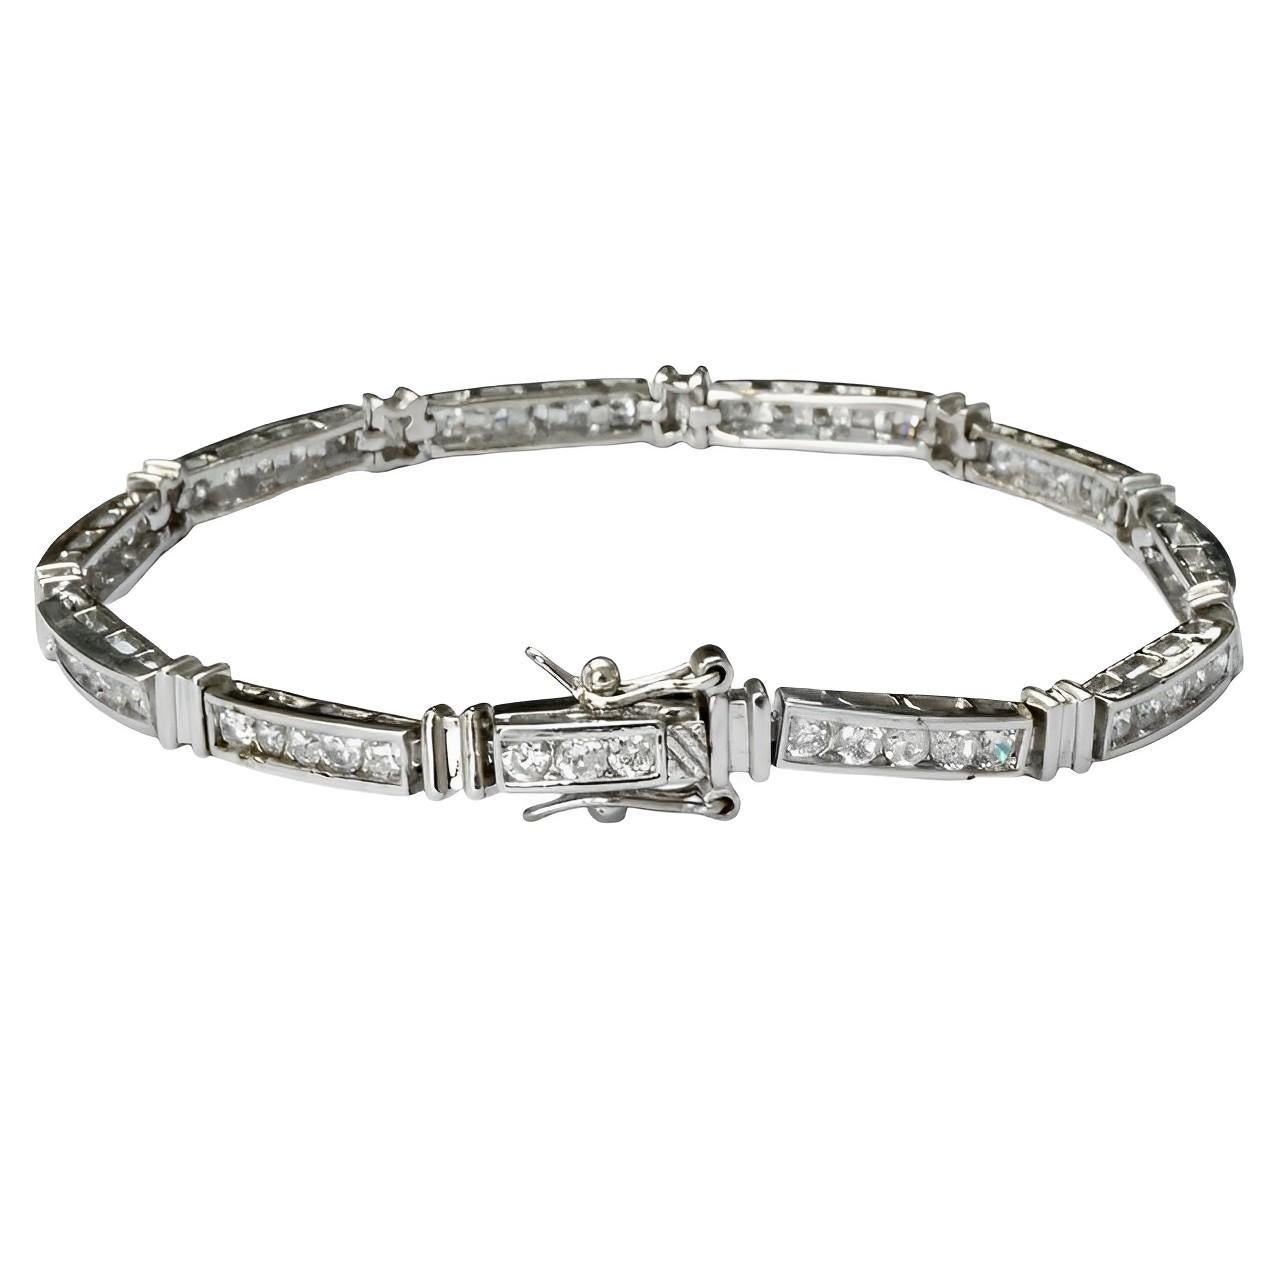 Beautiful silver plated link bracelet with double safety catches, featuring five channel set rhinestones in each link. Measuring length 19.4 cm / 7.6 inches by width 3.5 mm / .13 inch. The bracelet is in very good condition.

This classic rhinestone